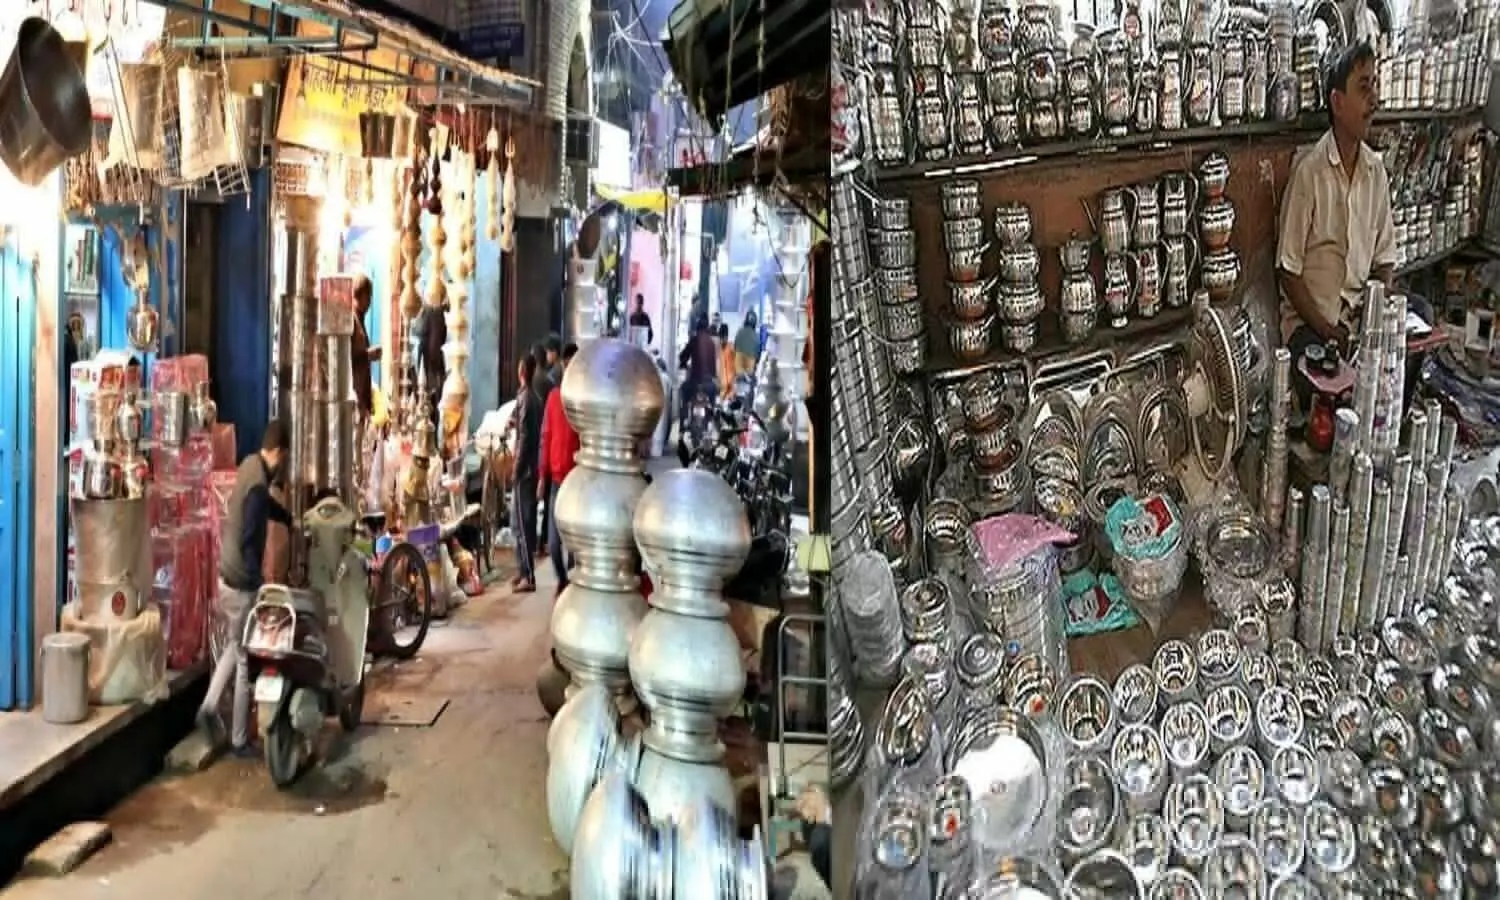 Pottery market in Lucknow